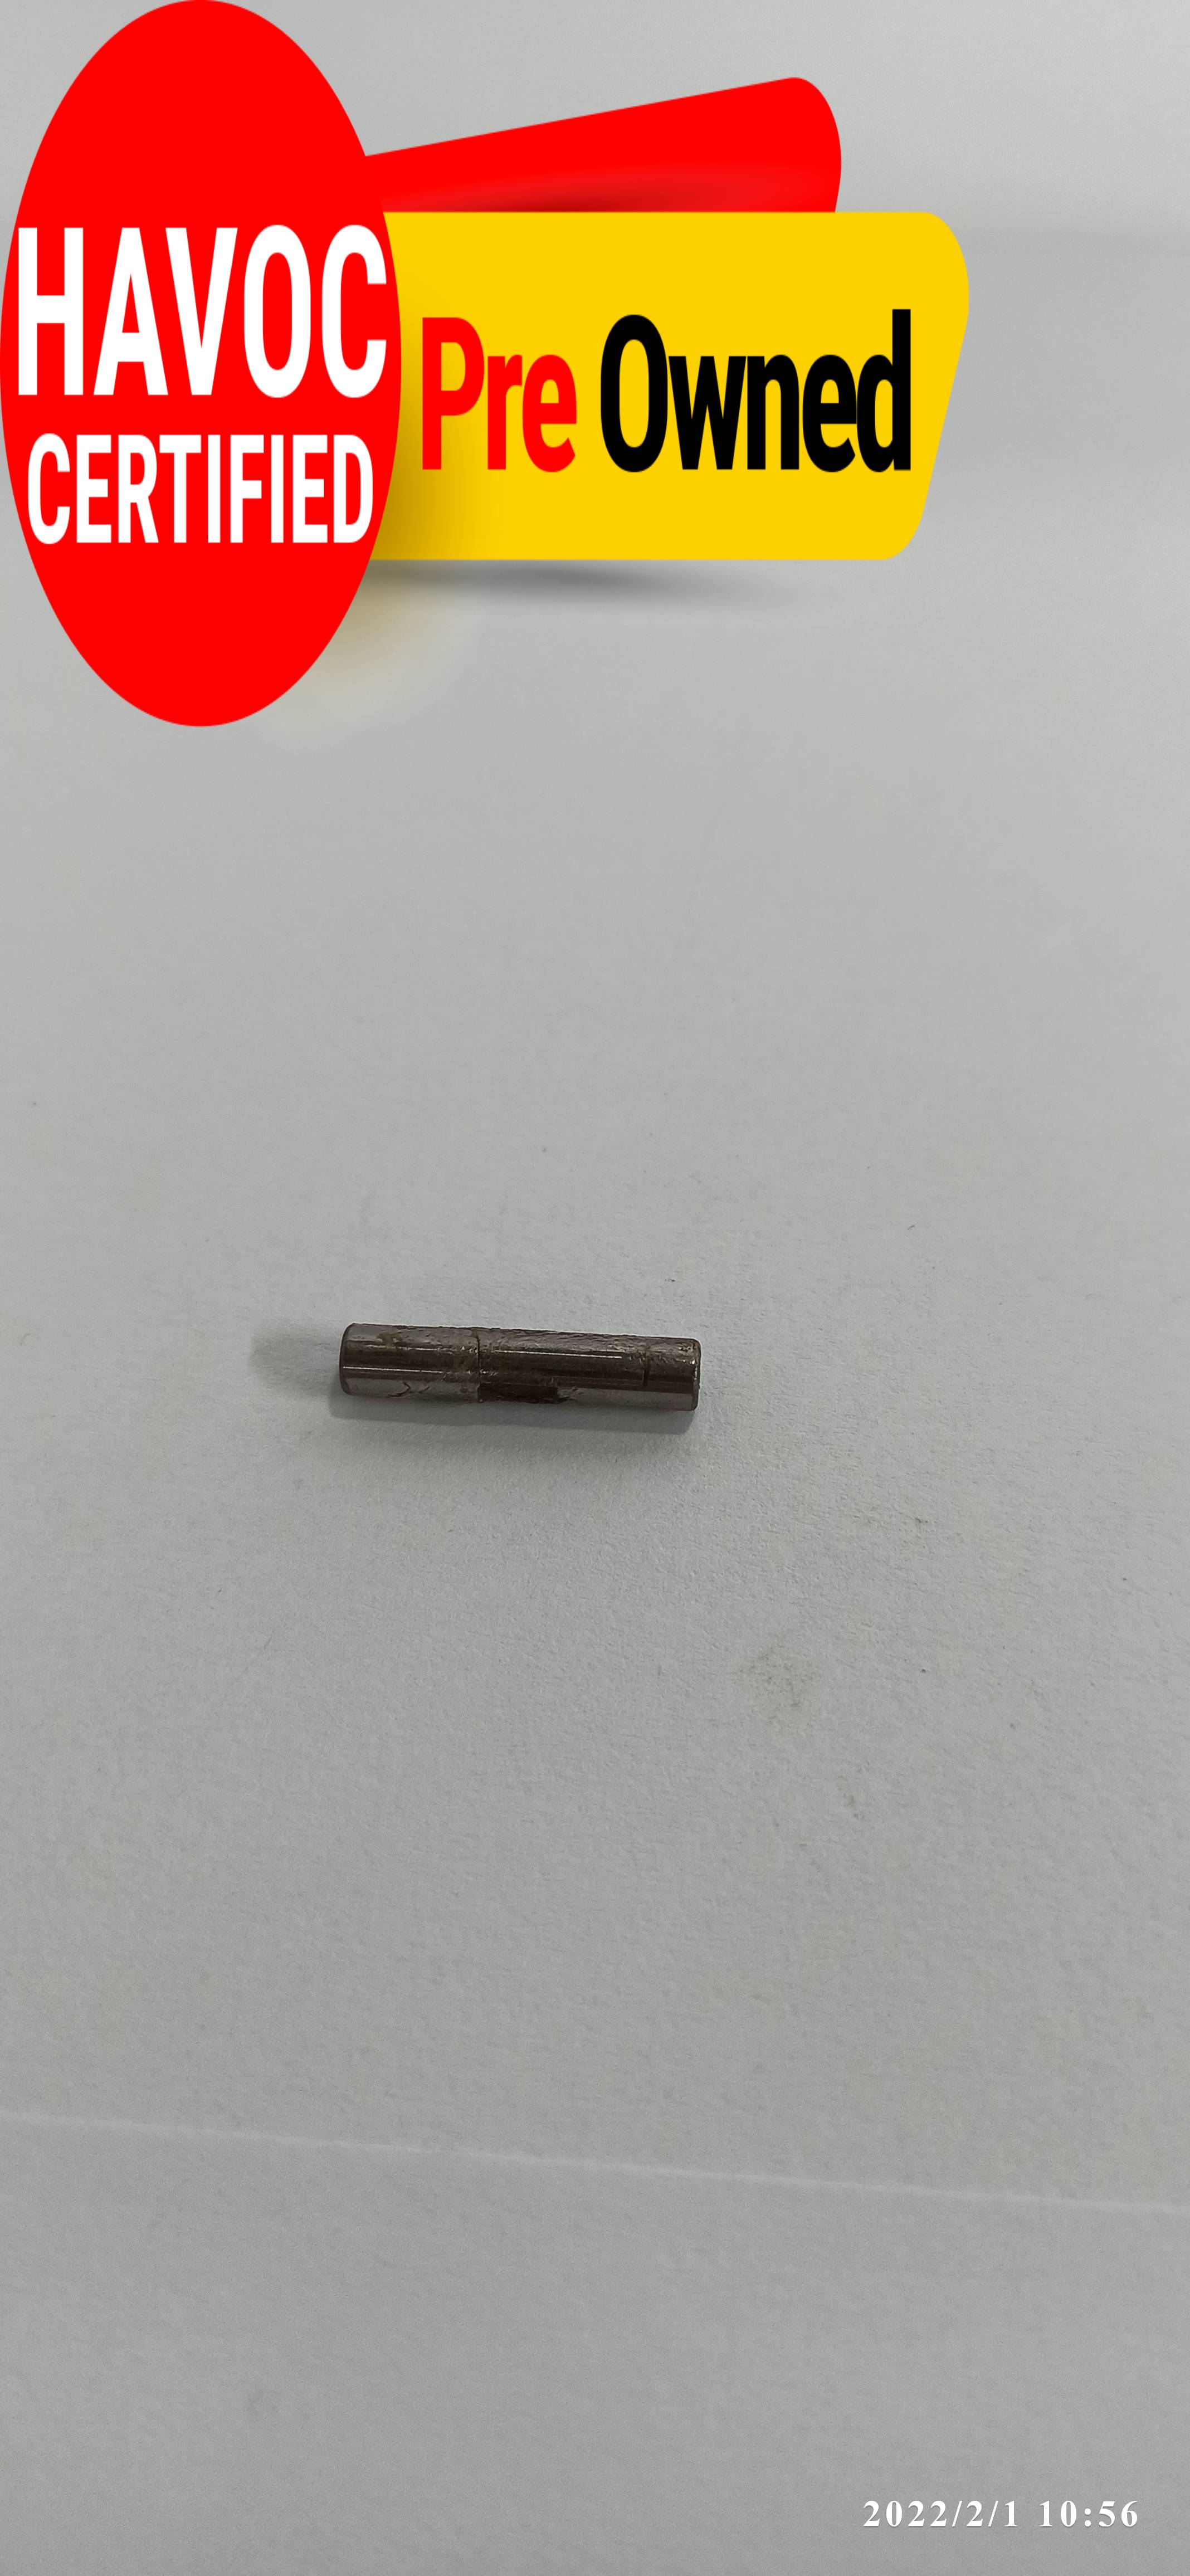 Losi Car Pin 1/5 Scale-Quality Pre Owned